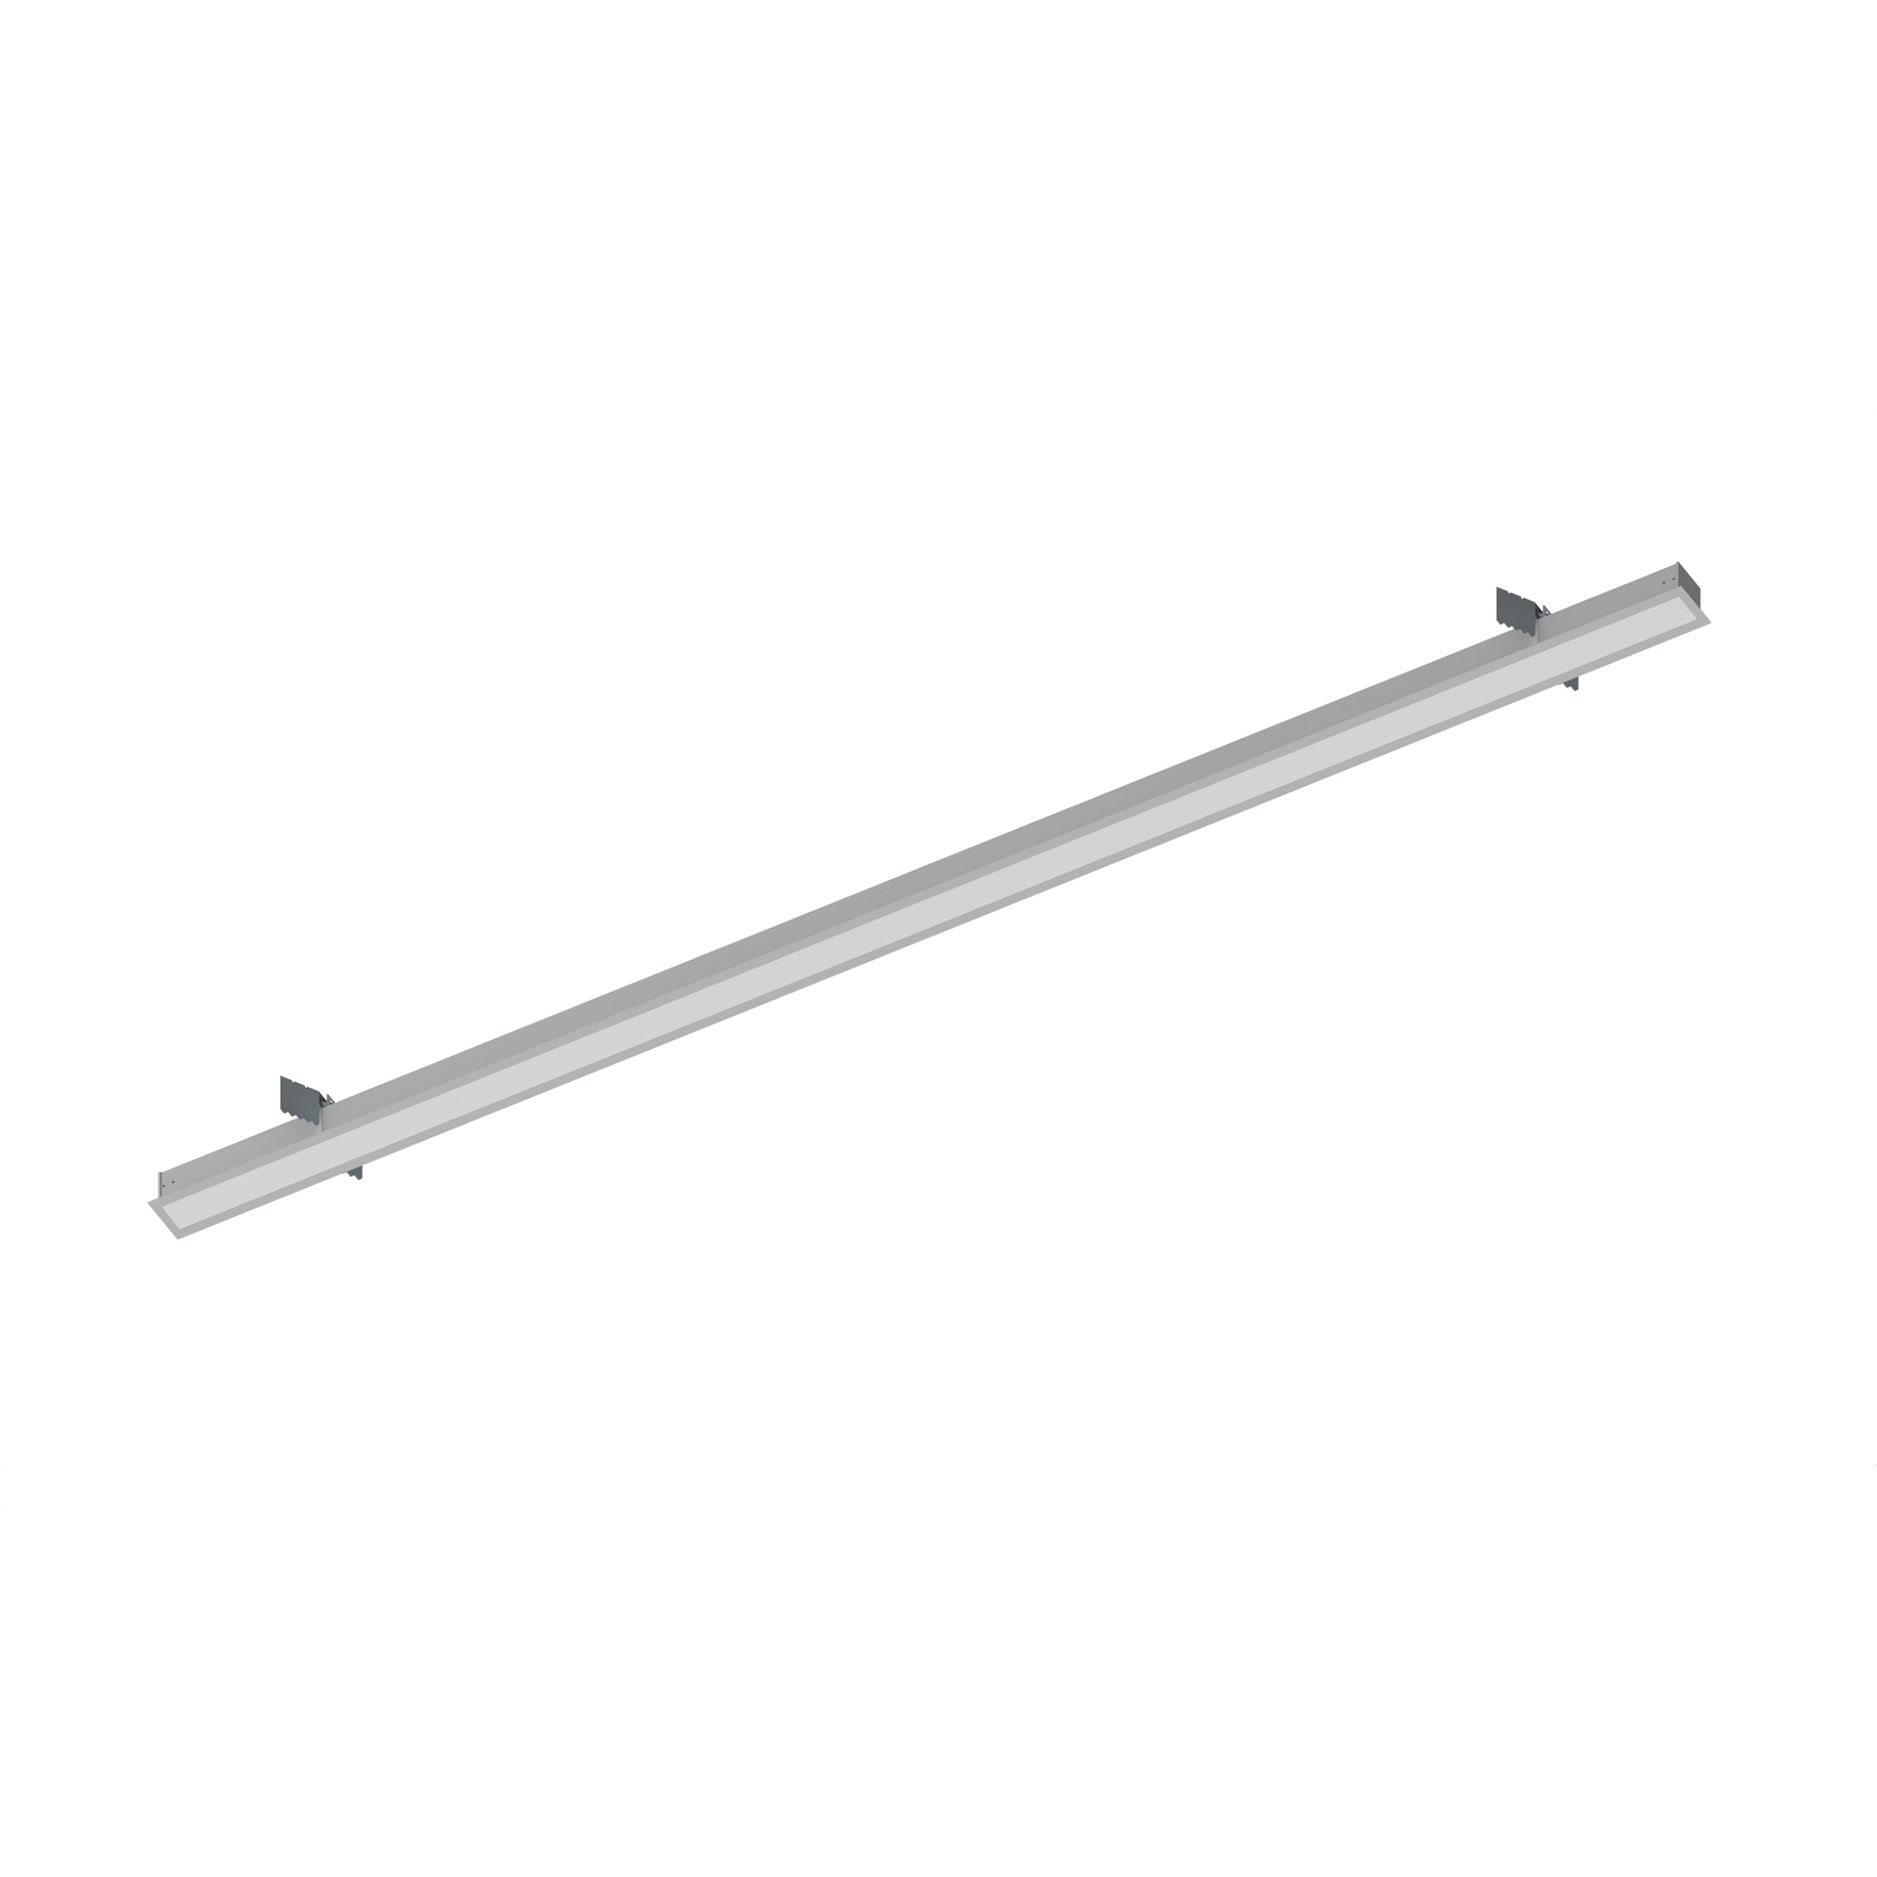 Nora Lighting NRLIN-81035A - Linear - 8' L-Line LED Recessed Linear, 8400lm / 3500K, Aluminum Finish